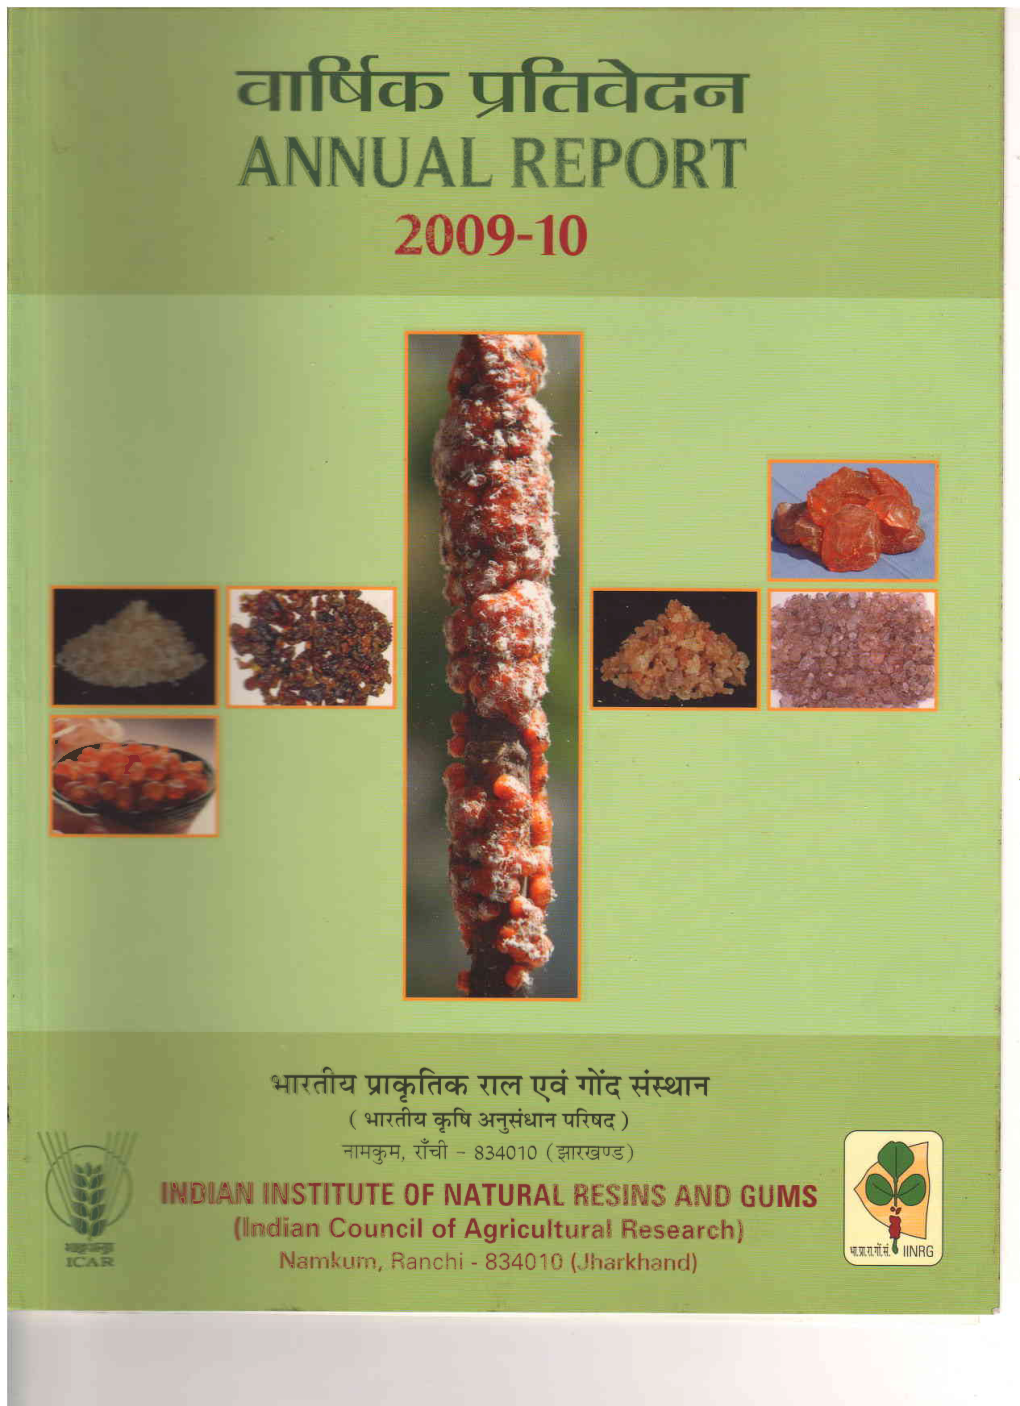 2009-10 Indian Institute of Natural Resins and Cums Namkum, Ranchi -834 010 Flharkhand)